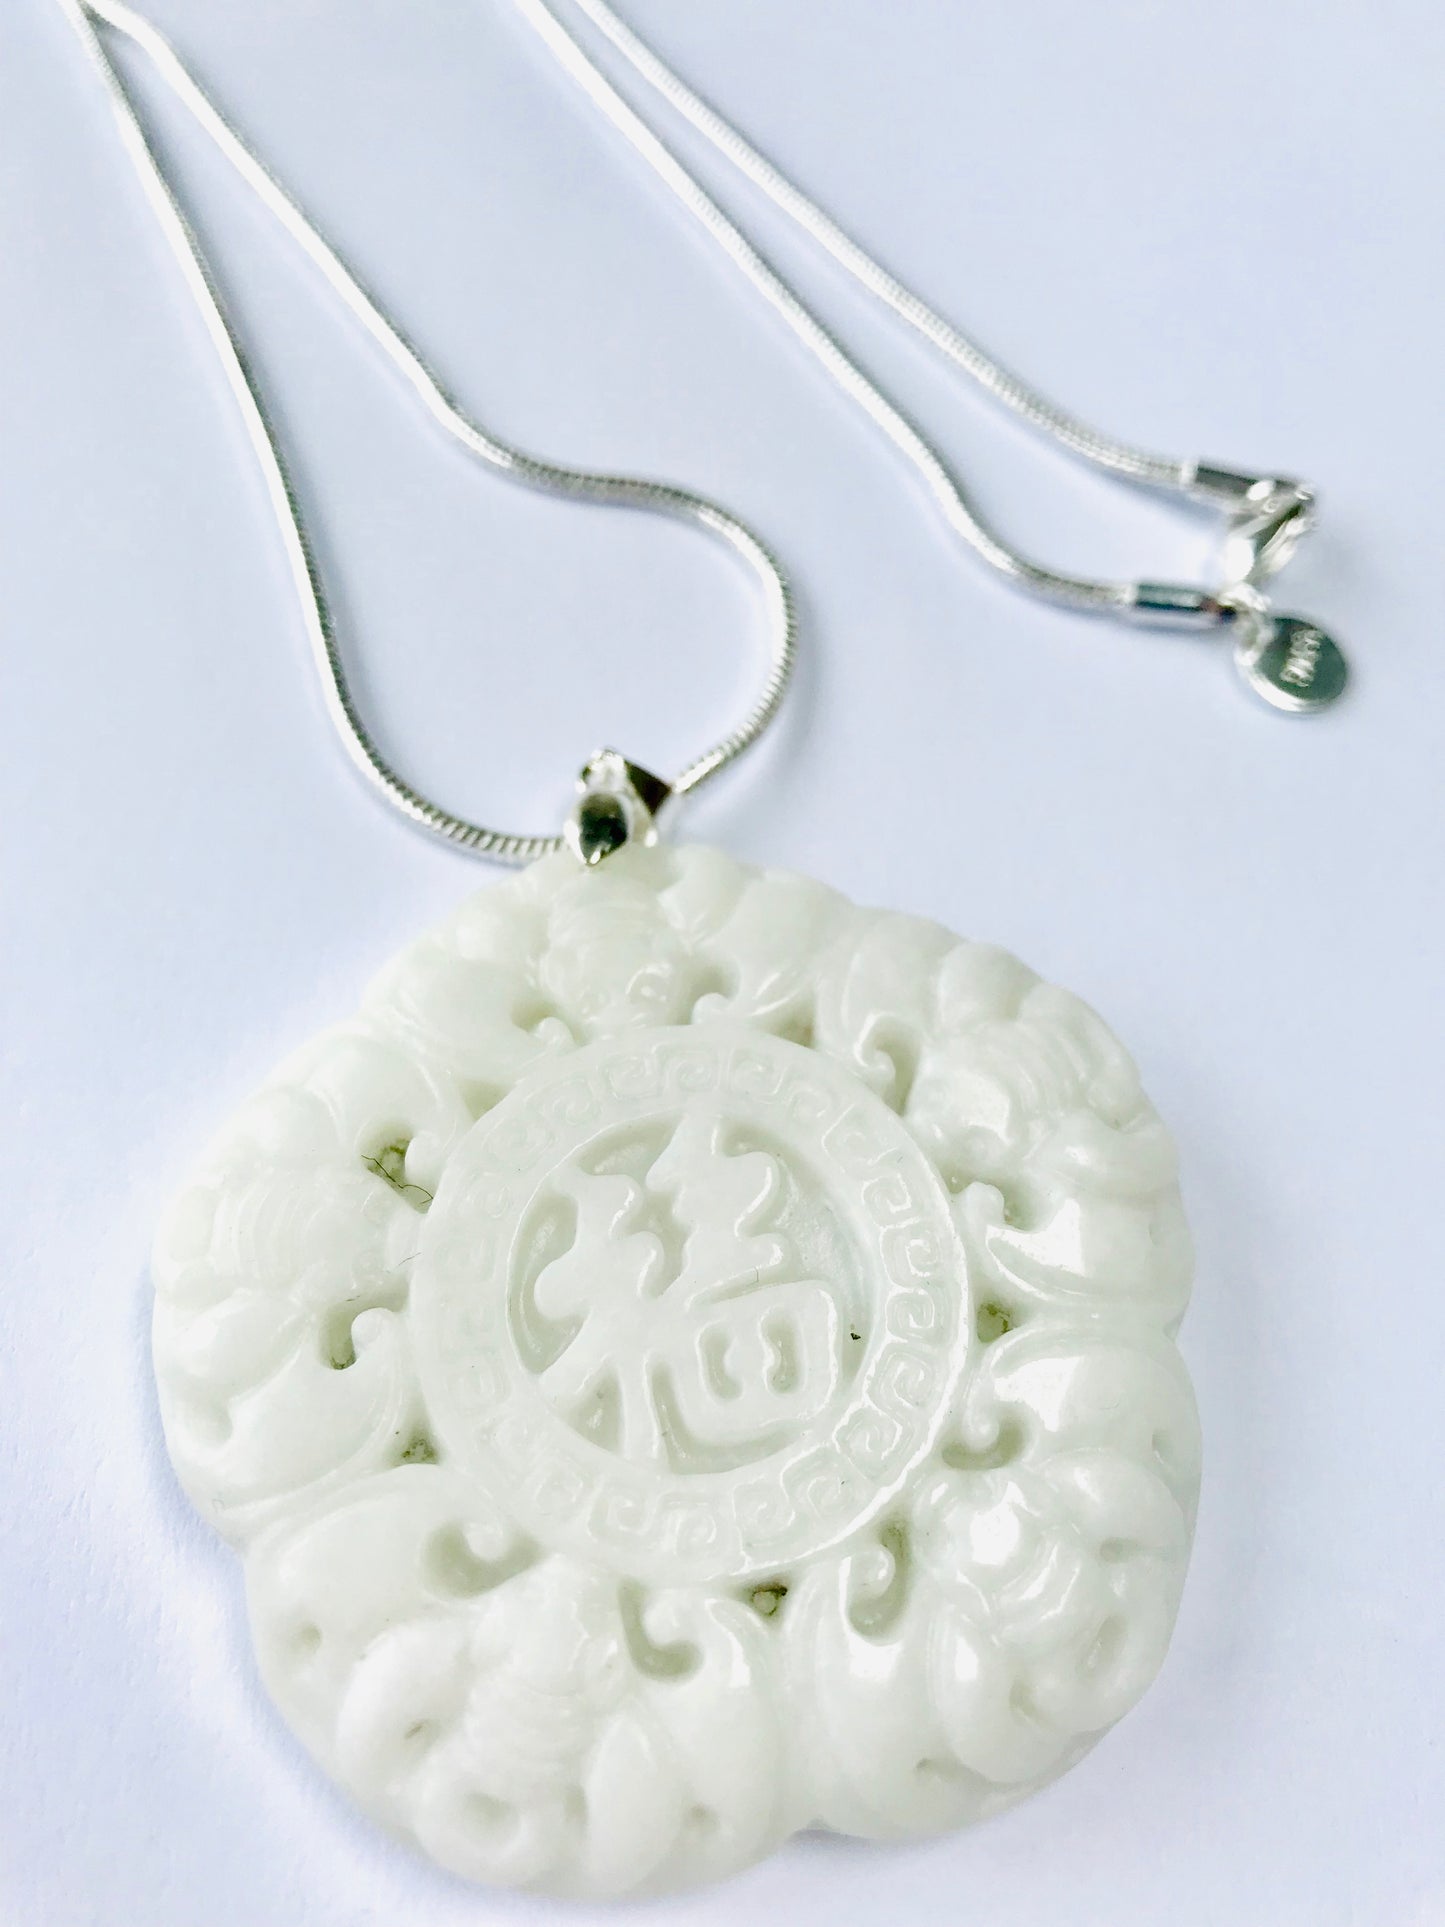 Jade Hand Carved Chinese Liantian Amulet Pendants 925 Snake Chain